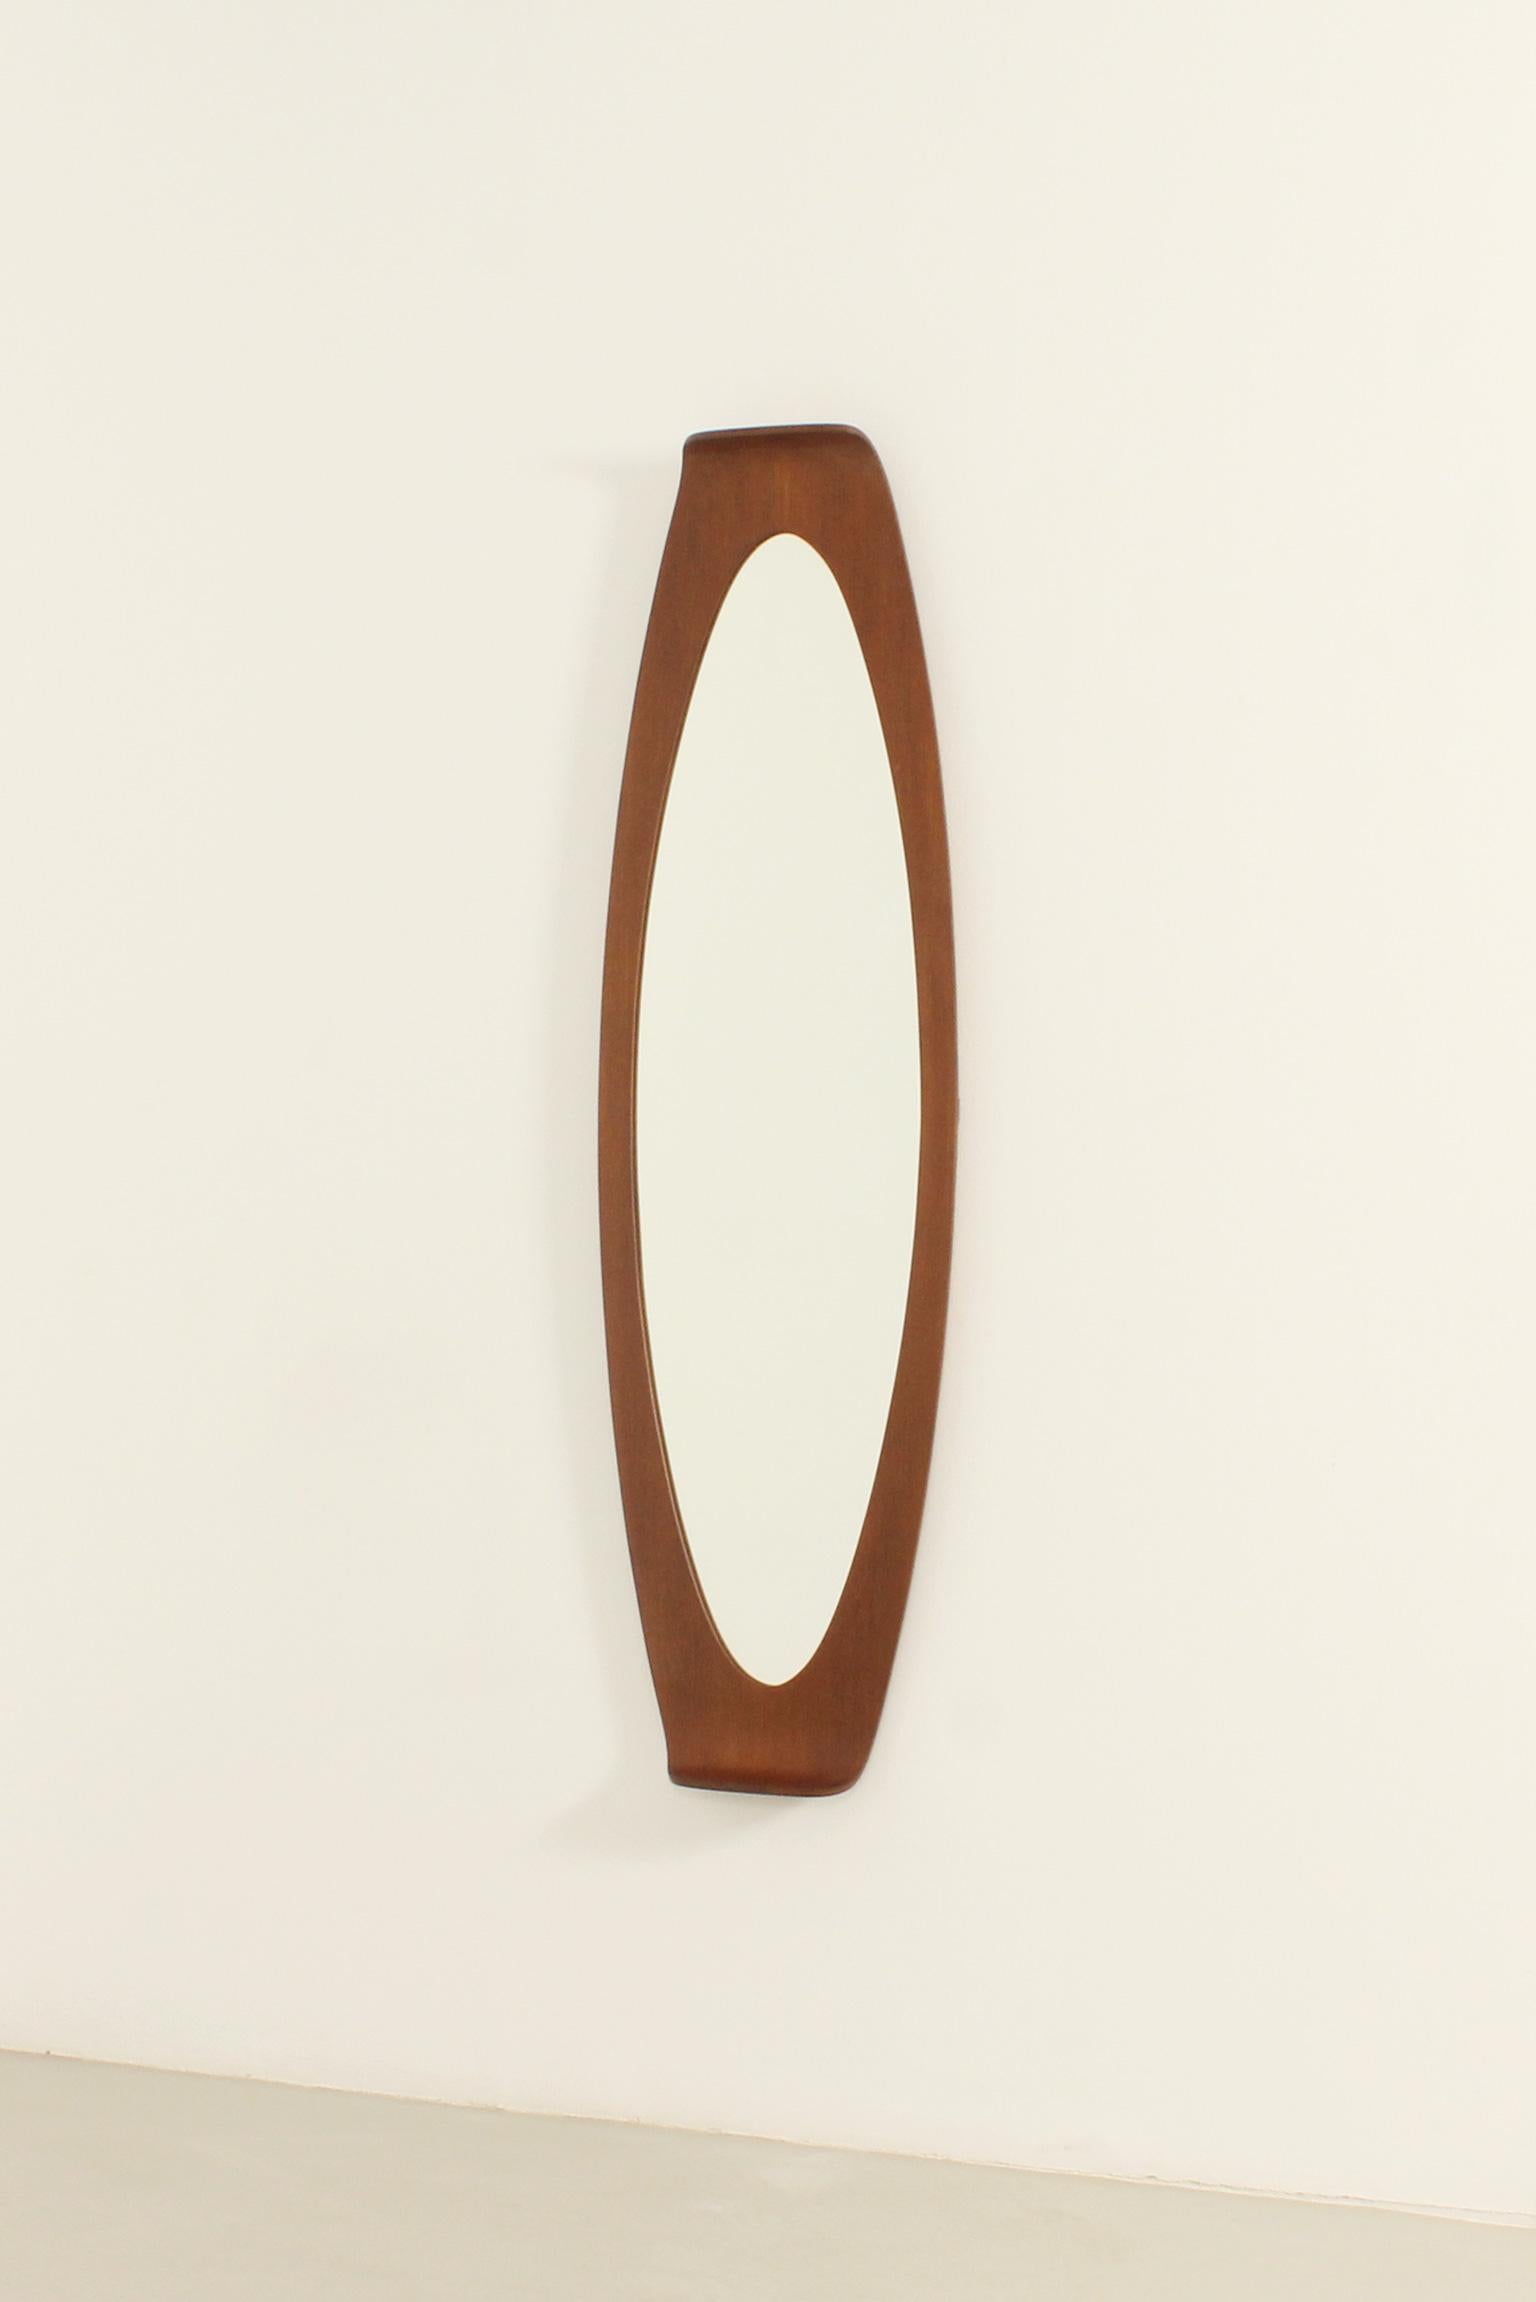 Large Campo & Graffi Wall Mirror for Home, Italy, 1950's For Sale 3